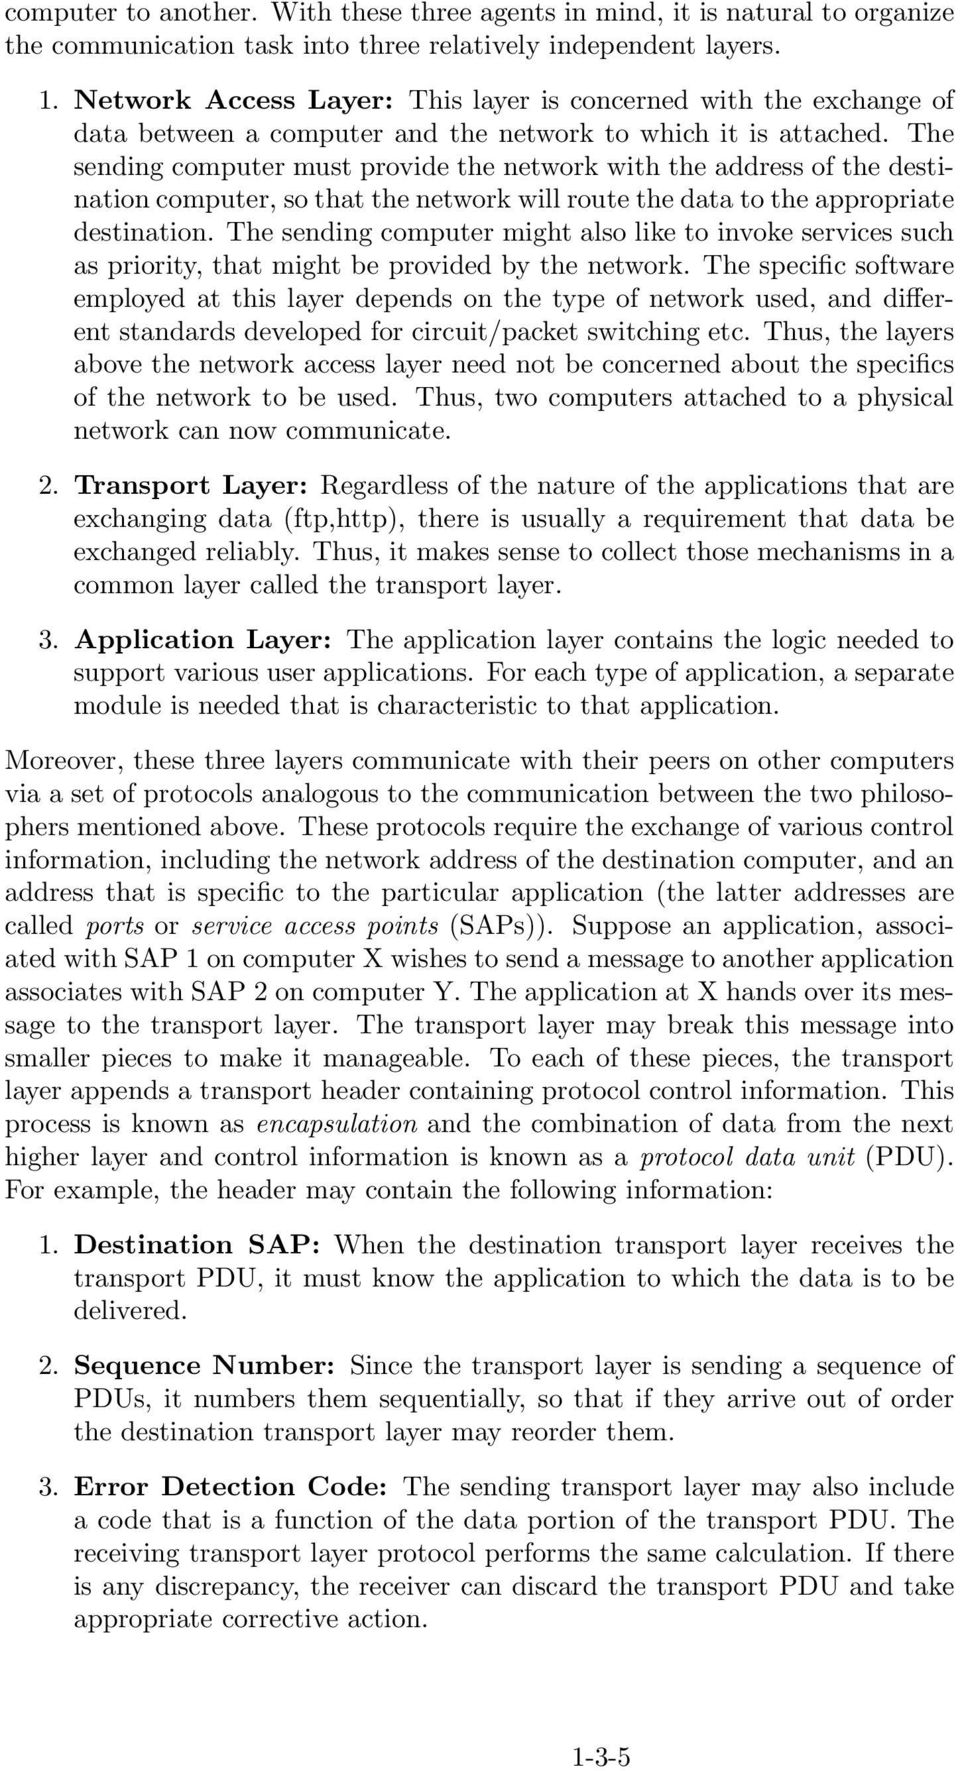 The sending computer must provide the network with the address of the destination computer, so that the network will route the data to the appropriate destination.